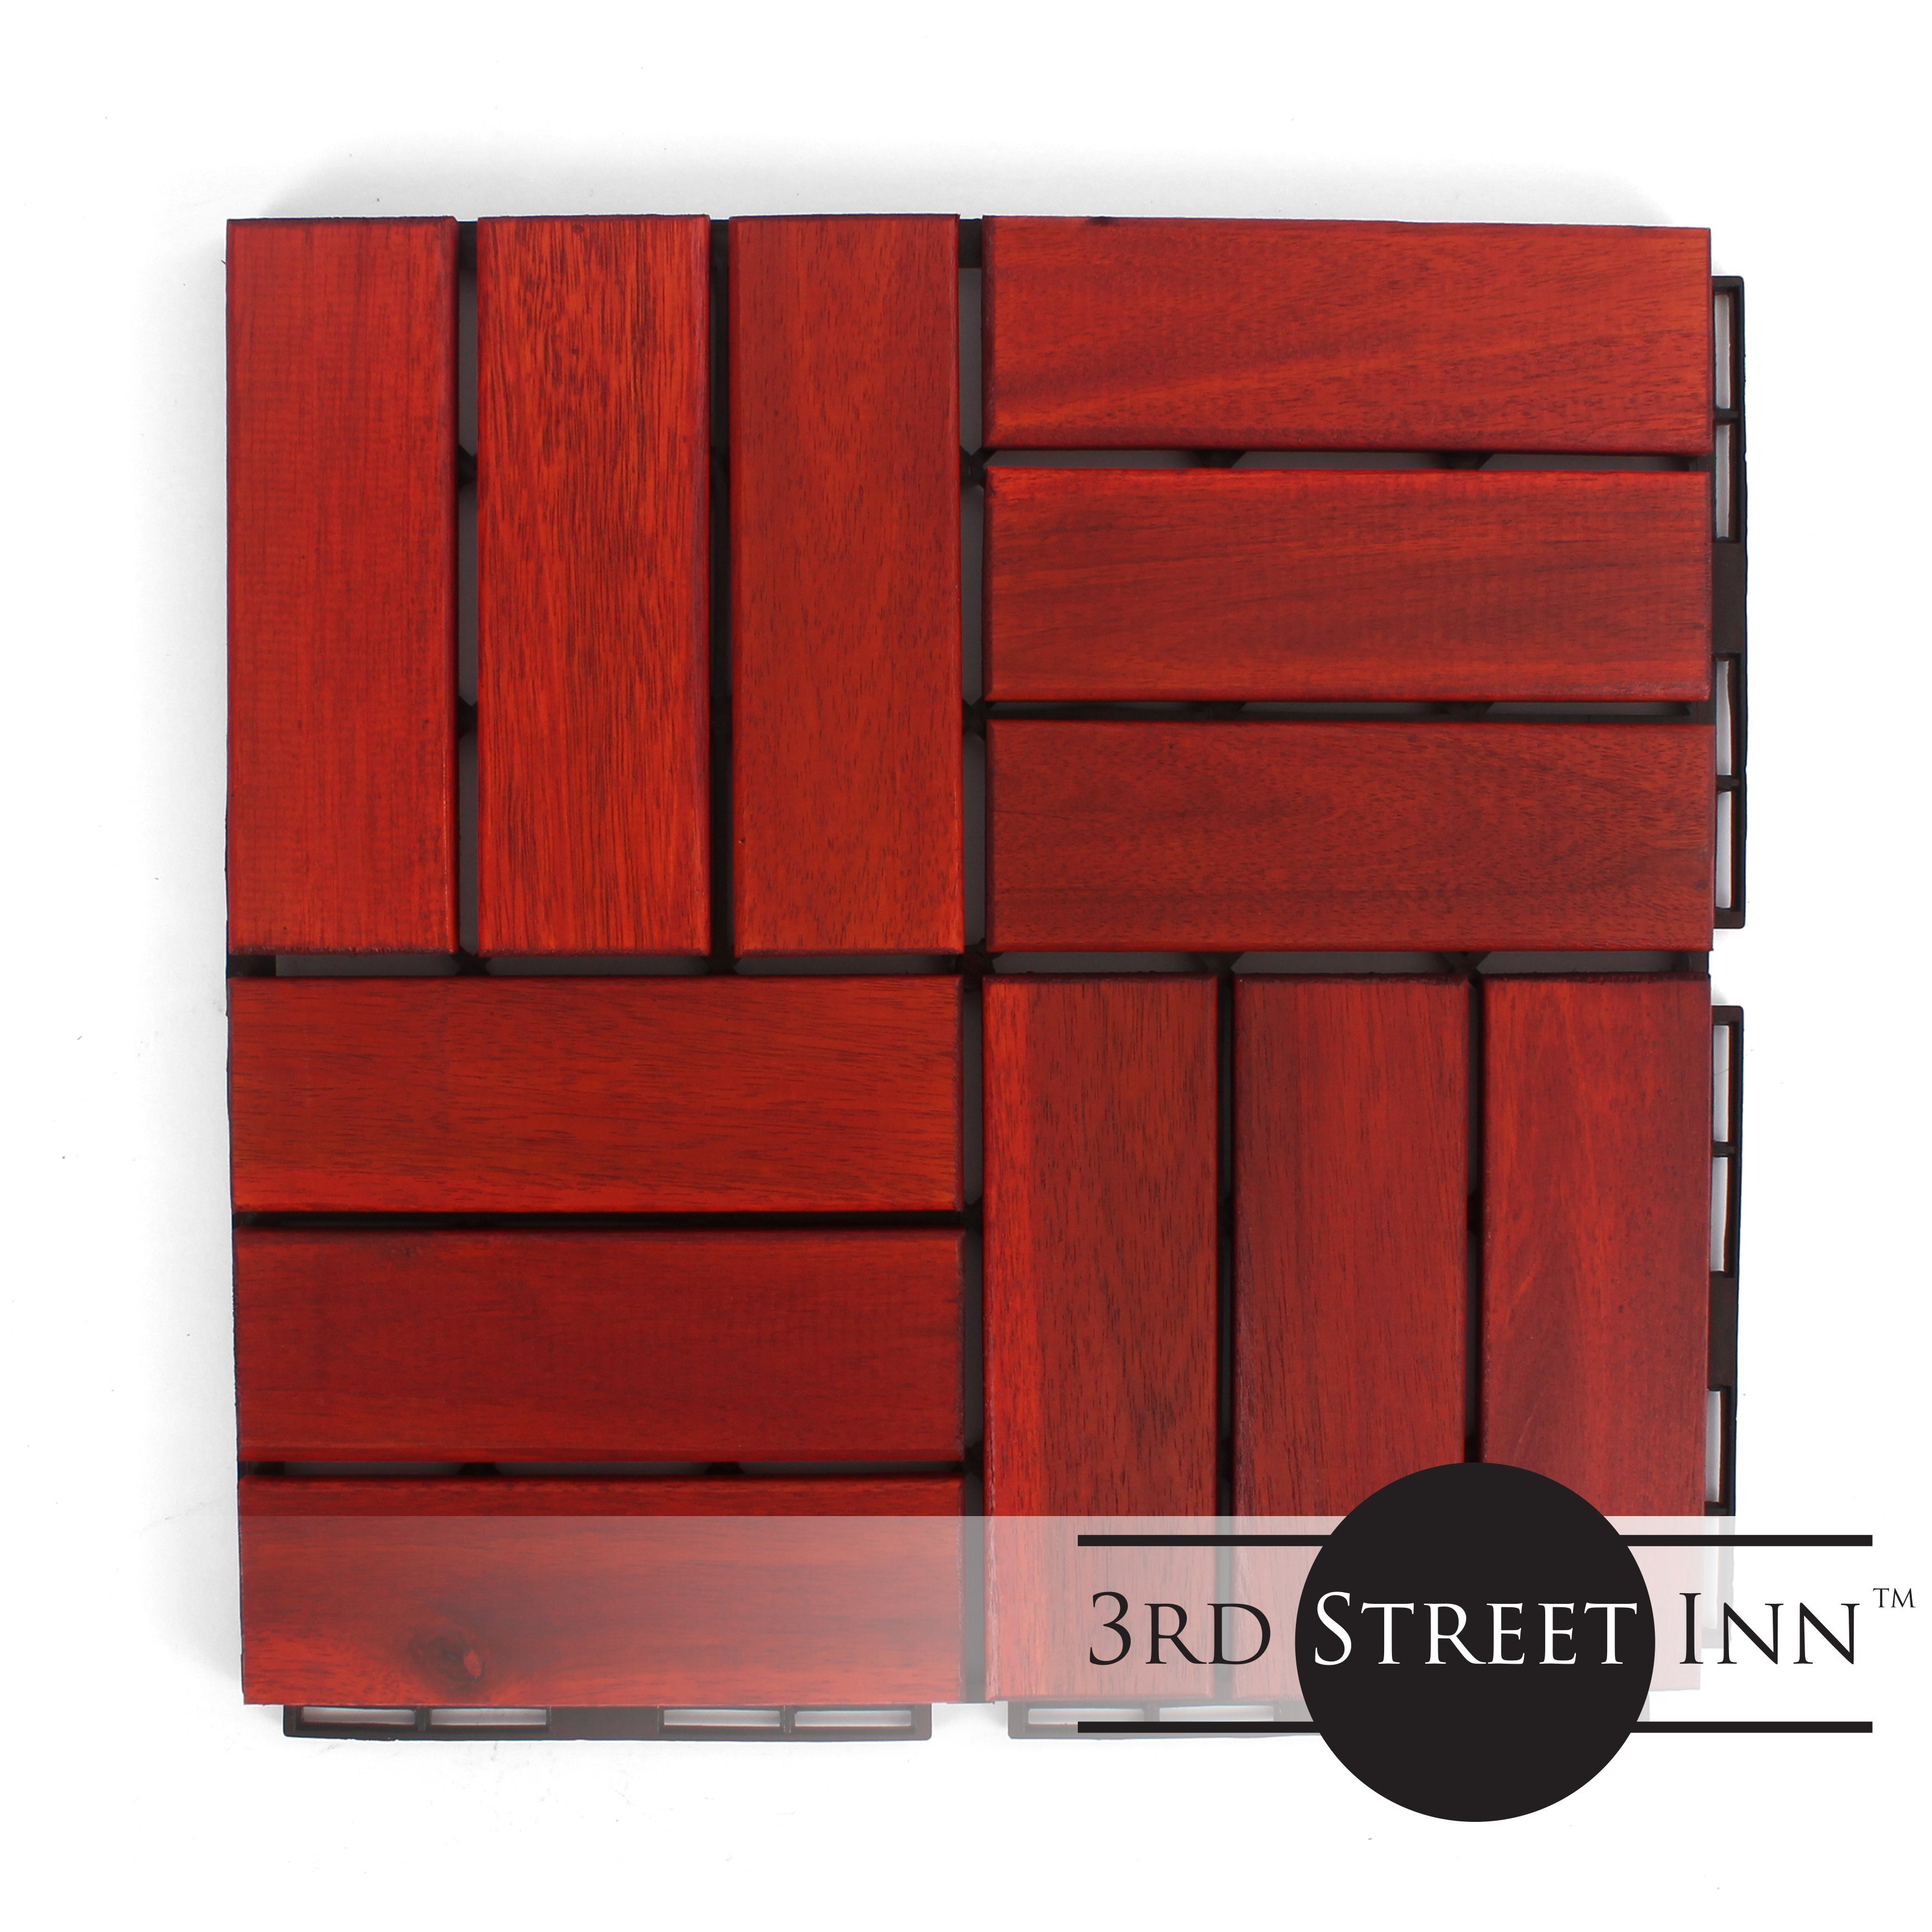 Crossroad Wood Tiles by ABK. From $3 in New York +delivery